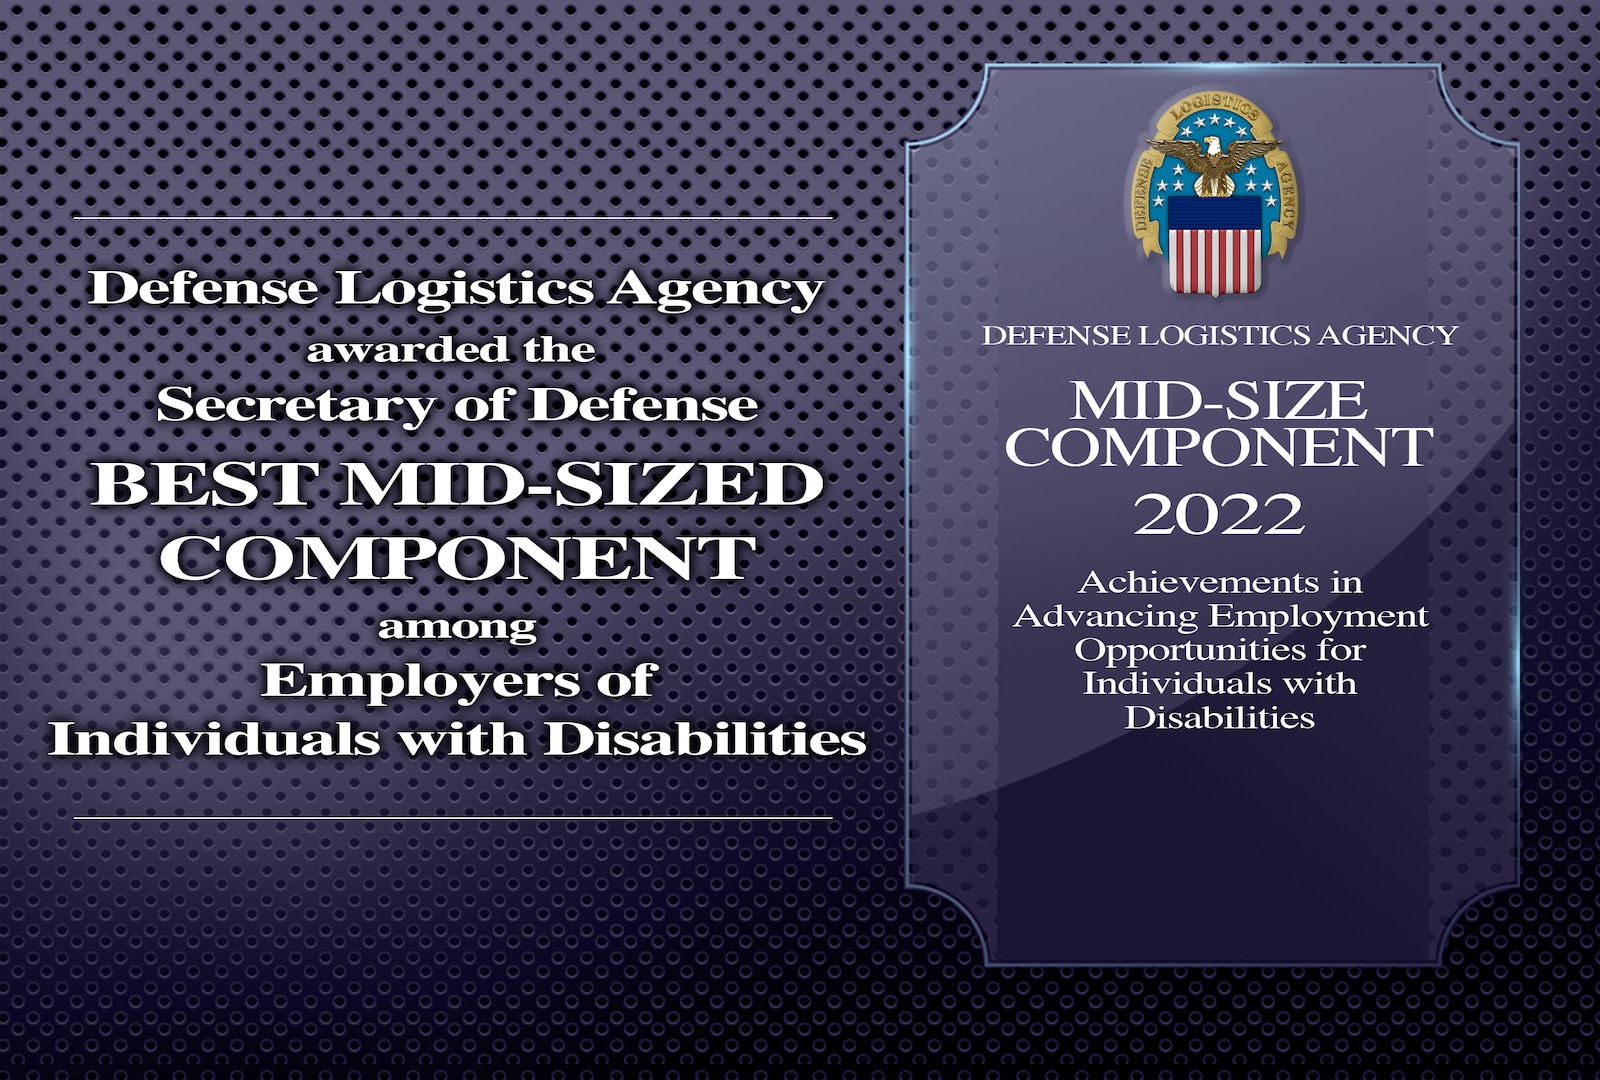 Graphic naming the Defense Logistics Agency's best mid-sized component award.